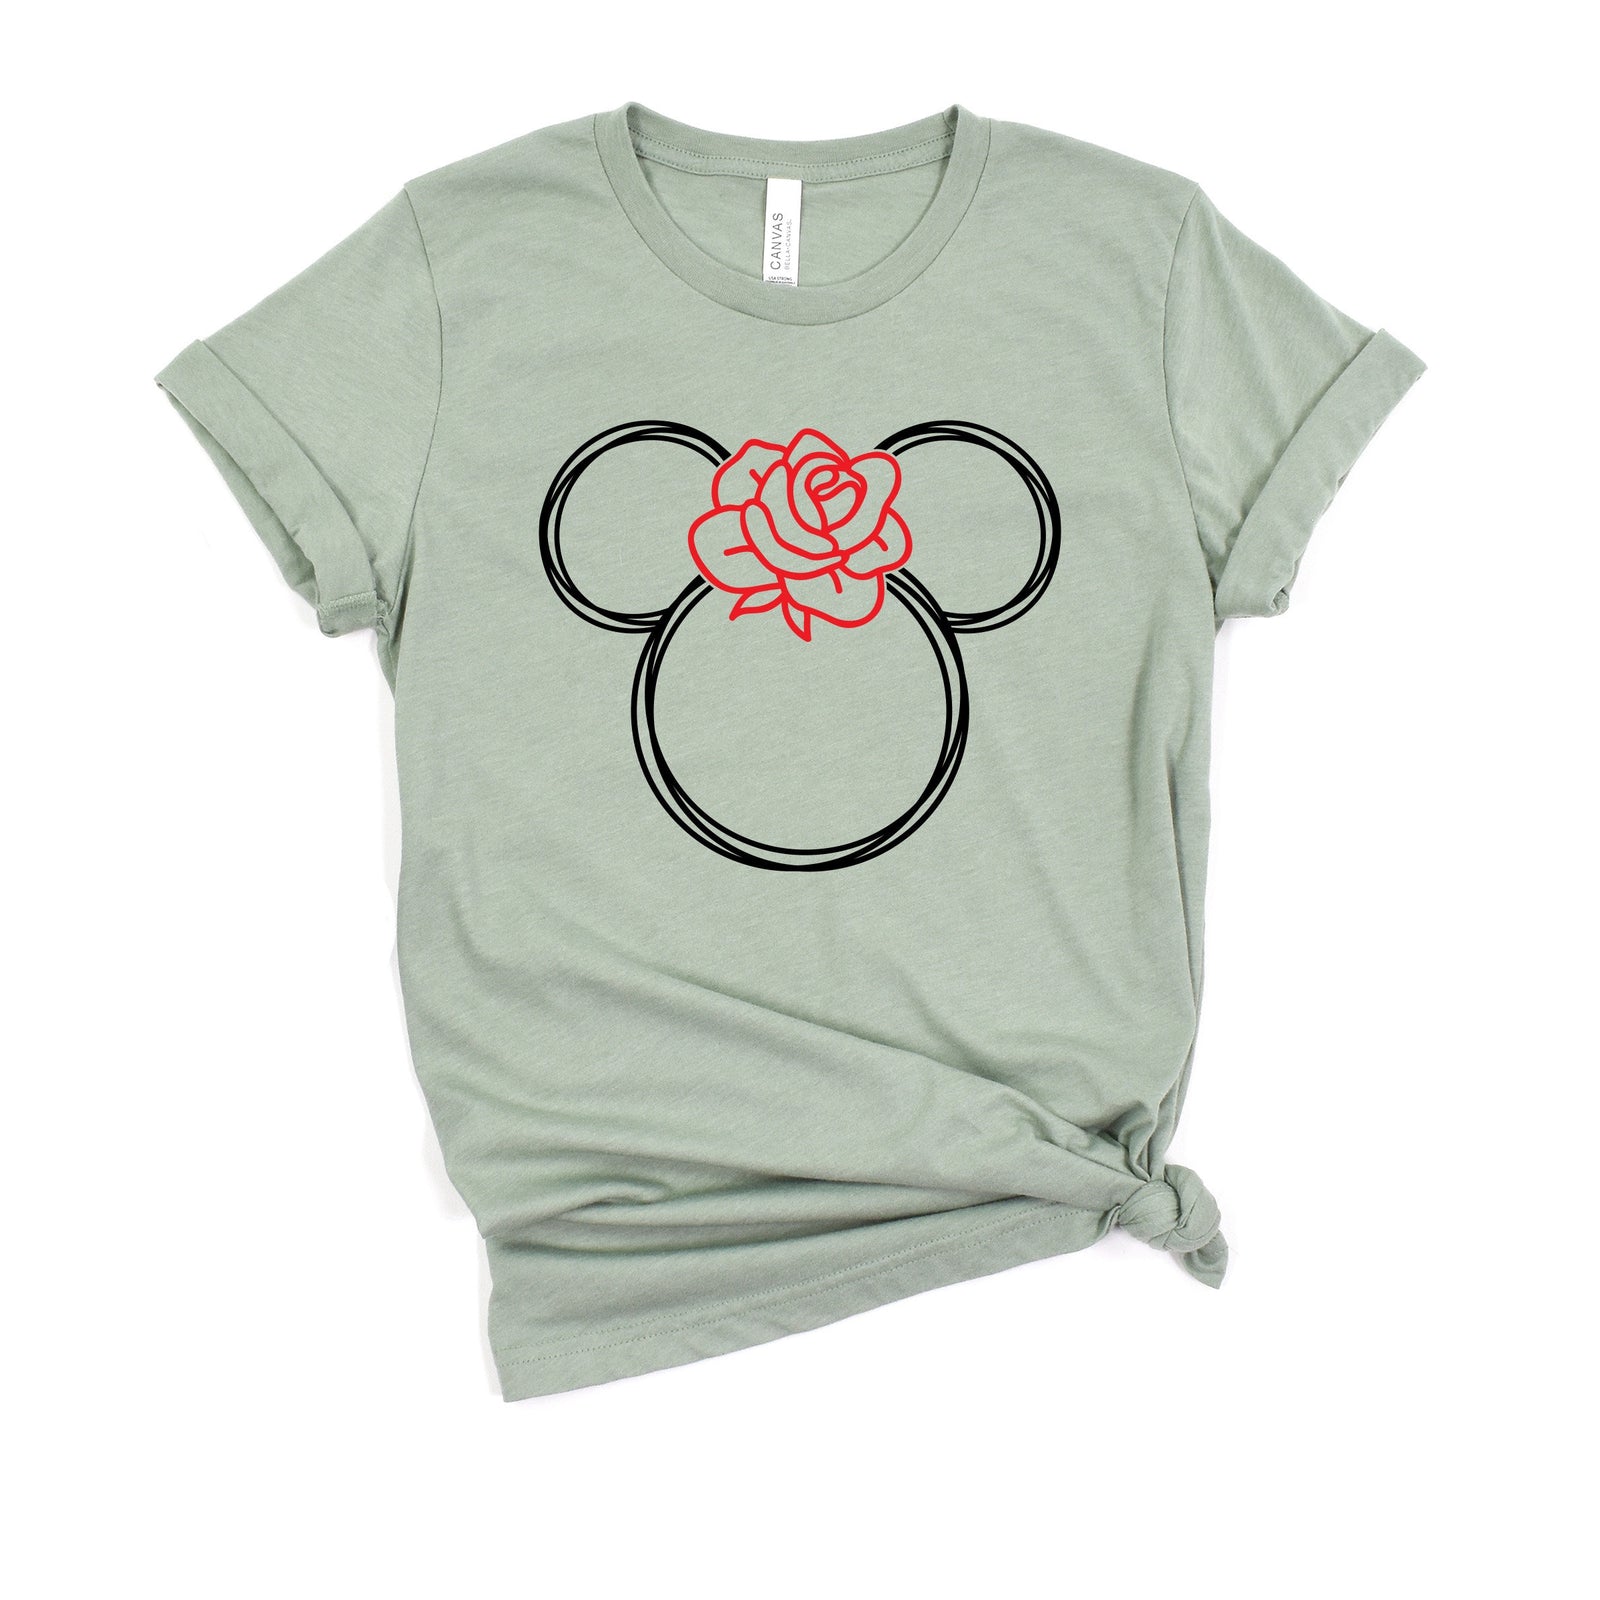 Sketch Mickey with Rose - Floral Scribble Mickey Adult T Shirt - Mickey Minnie Mouse T Shirt - Epcot Flower and Garden Festival Shirt